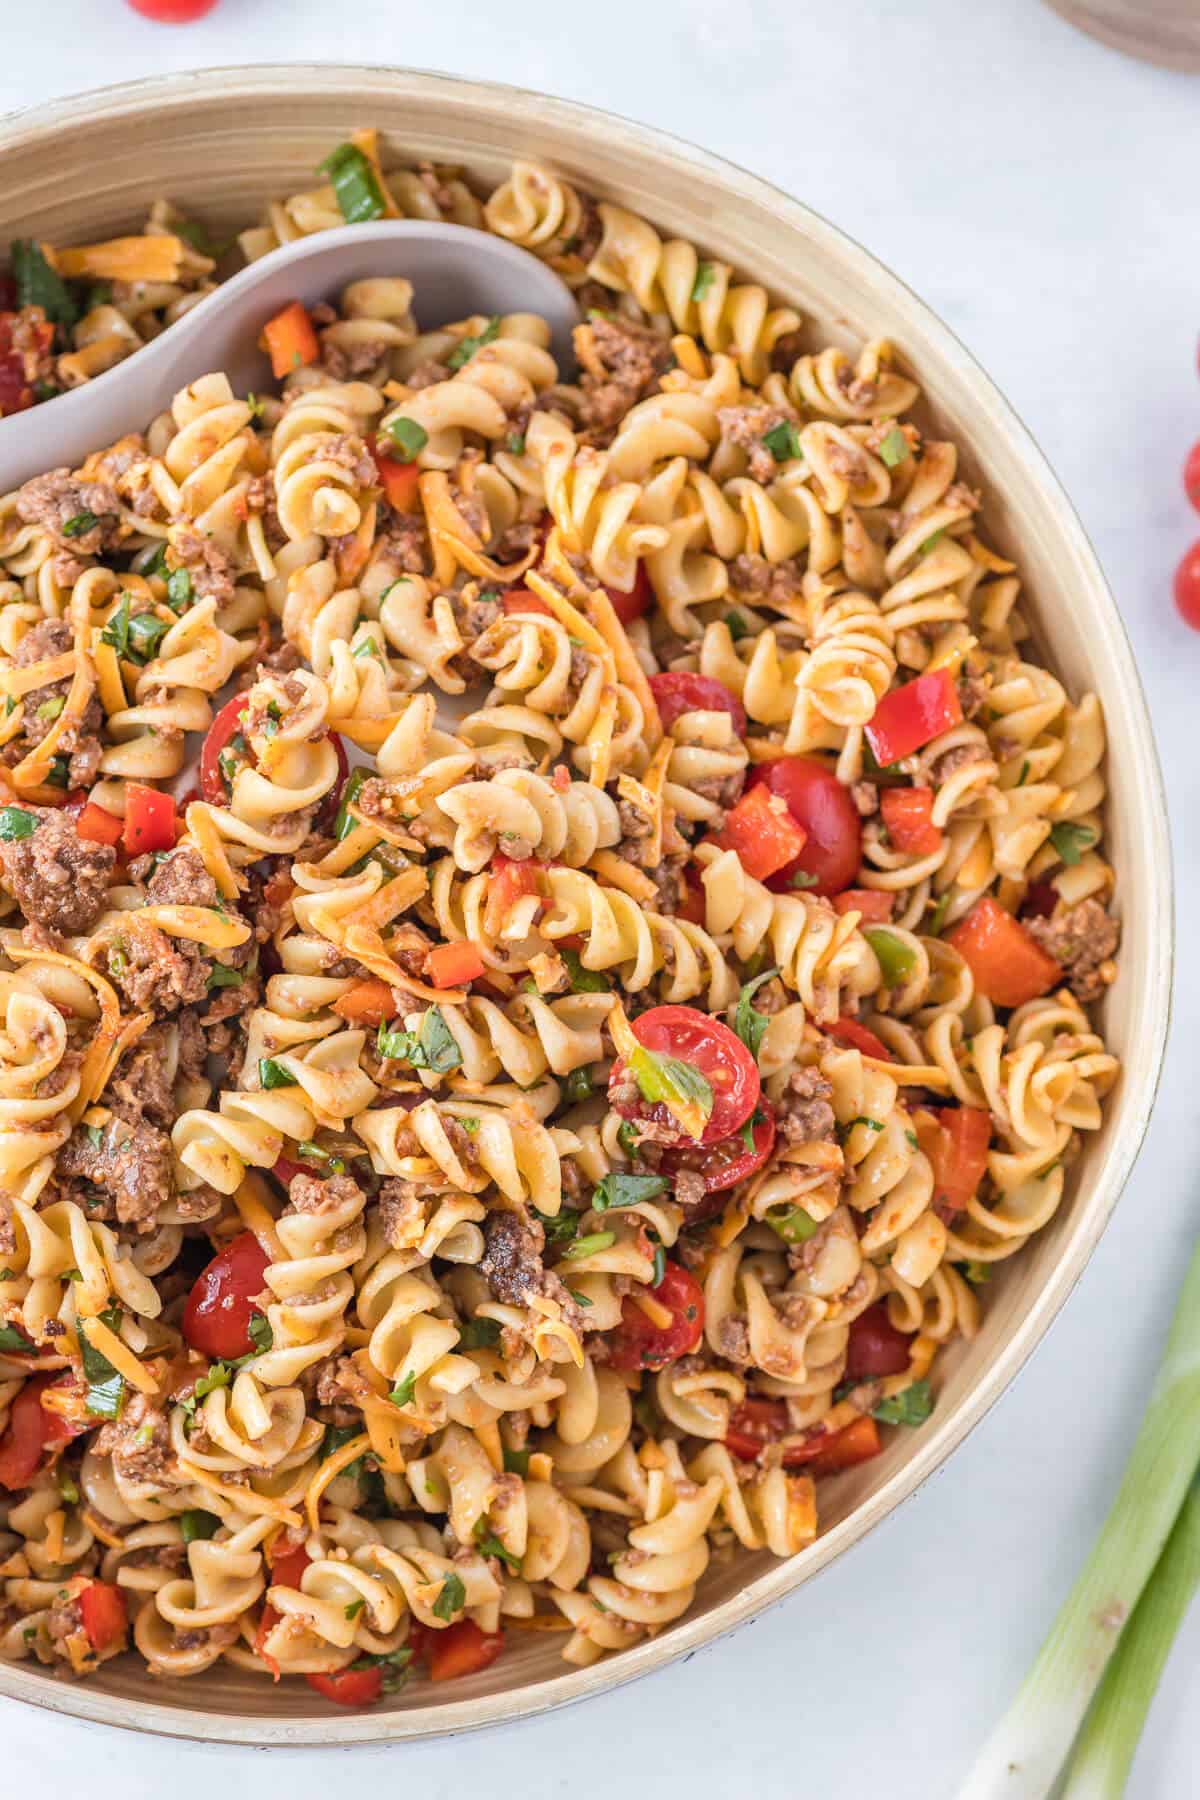 A bowl of taco pasta salad with a serving spoon.